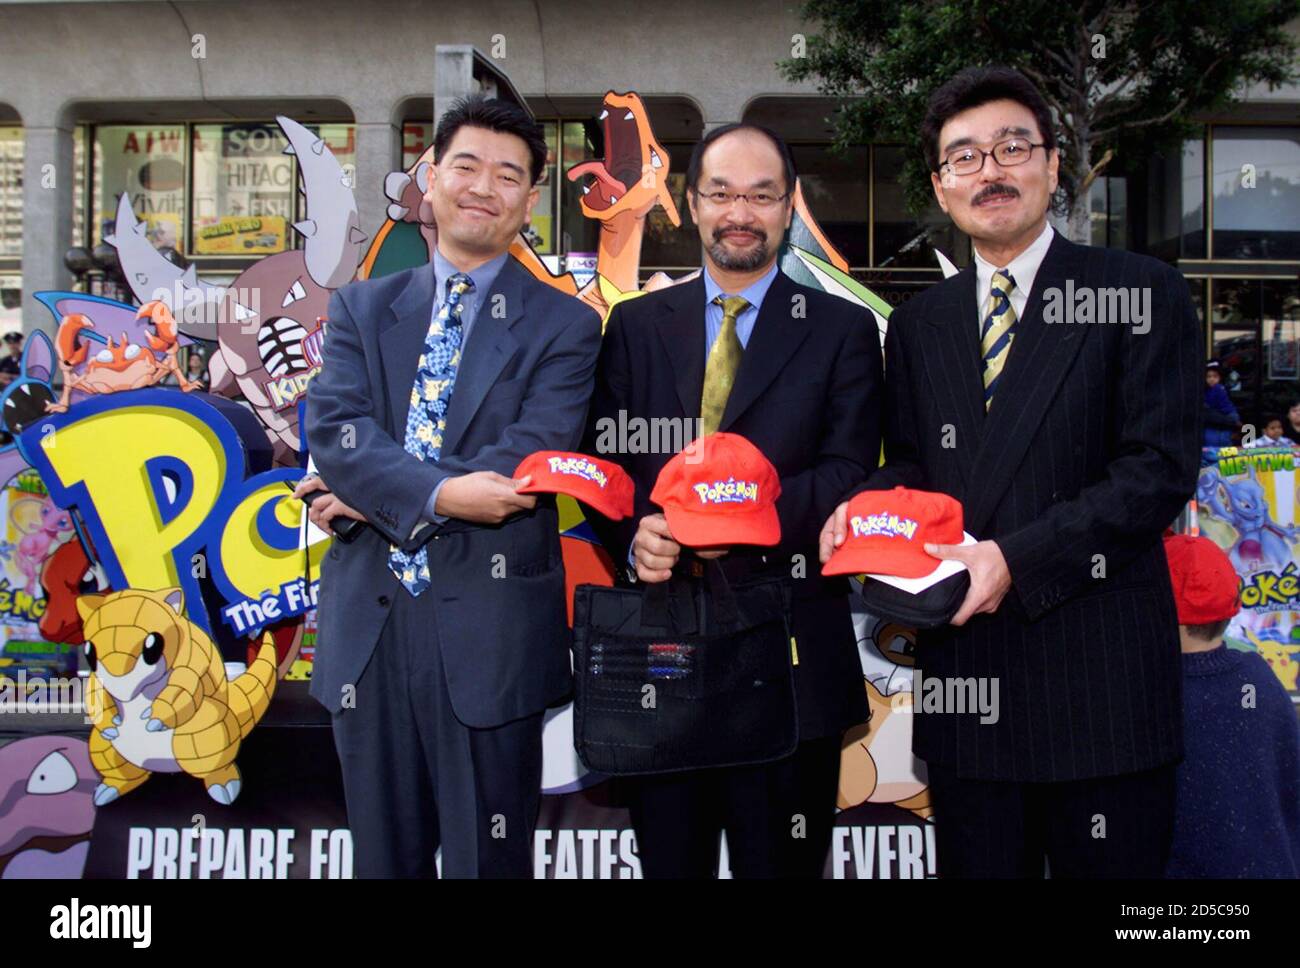 Producers  of the animated film ' Pokemon The First Movie' pose together at the film's premiere November 6, at Mann's Chinese Theatre in Hollywood. From the left are: Takemoto Mori, producer, Masakazu Kubo, executive producer, and Toshiaki Okuno, animation producer. The animated adventure is based on the hit Japanese television series and video game. **DIGITAL IMAGE** Stock Photo